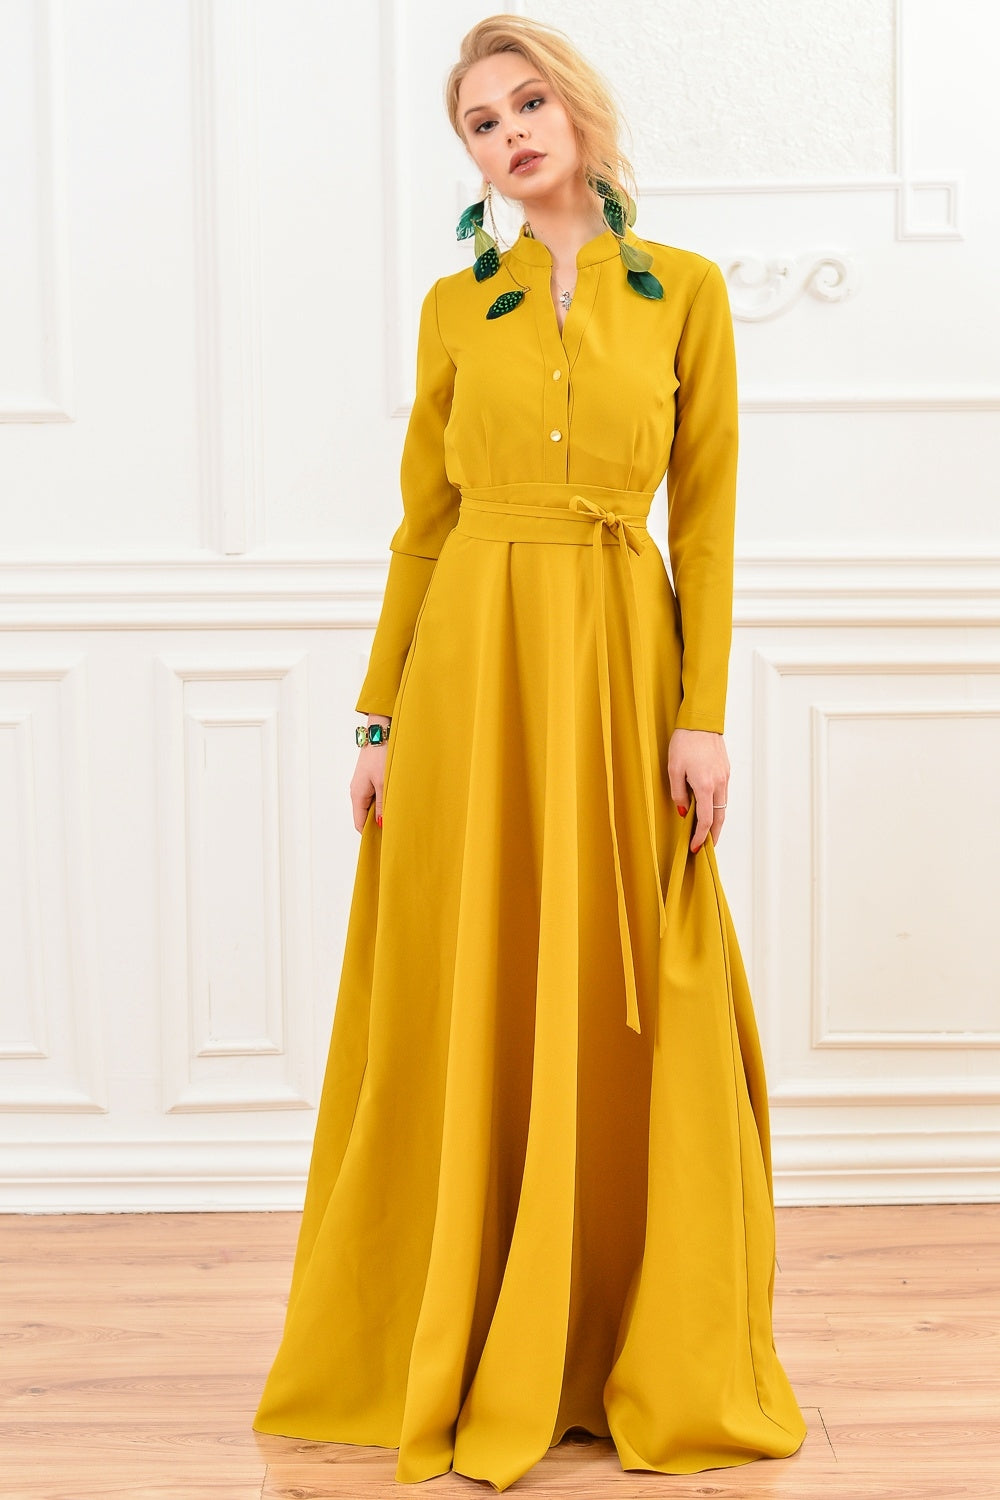 Mustard yellow maxi dress with stand up collar and front buttons